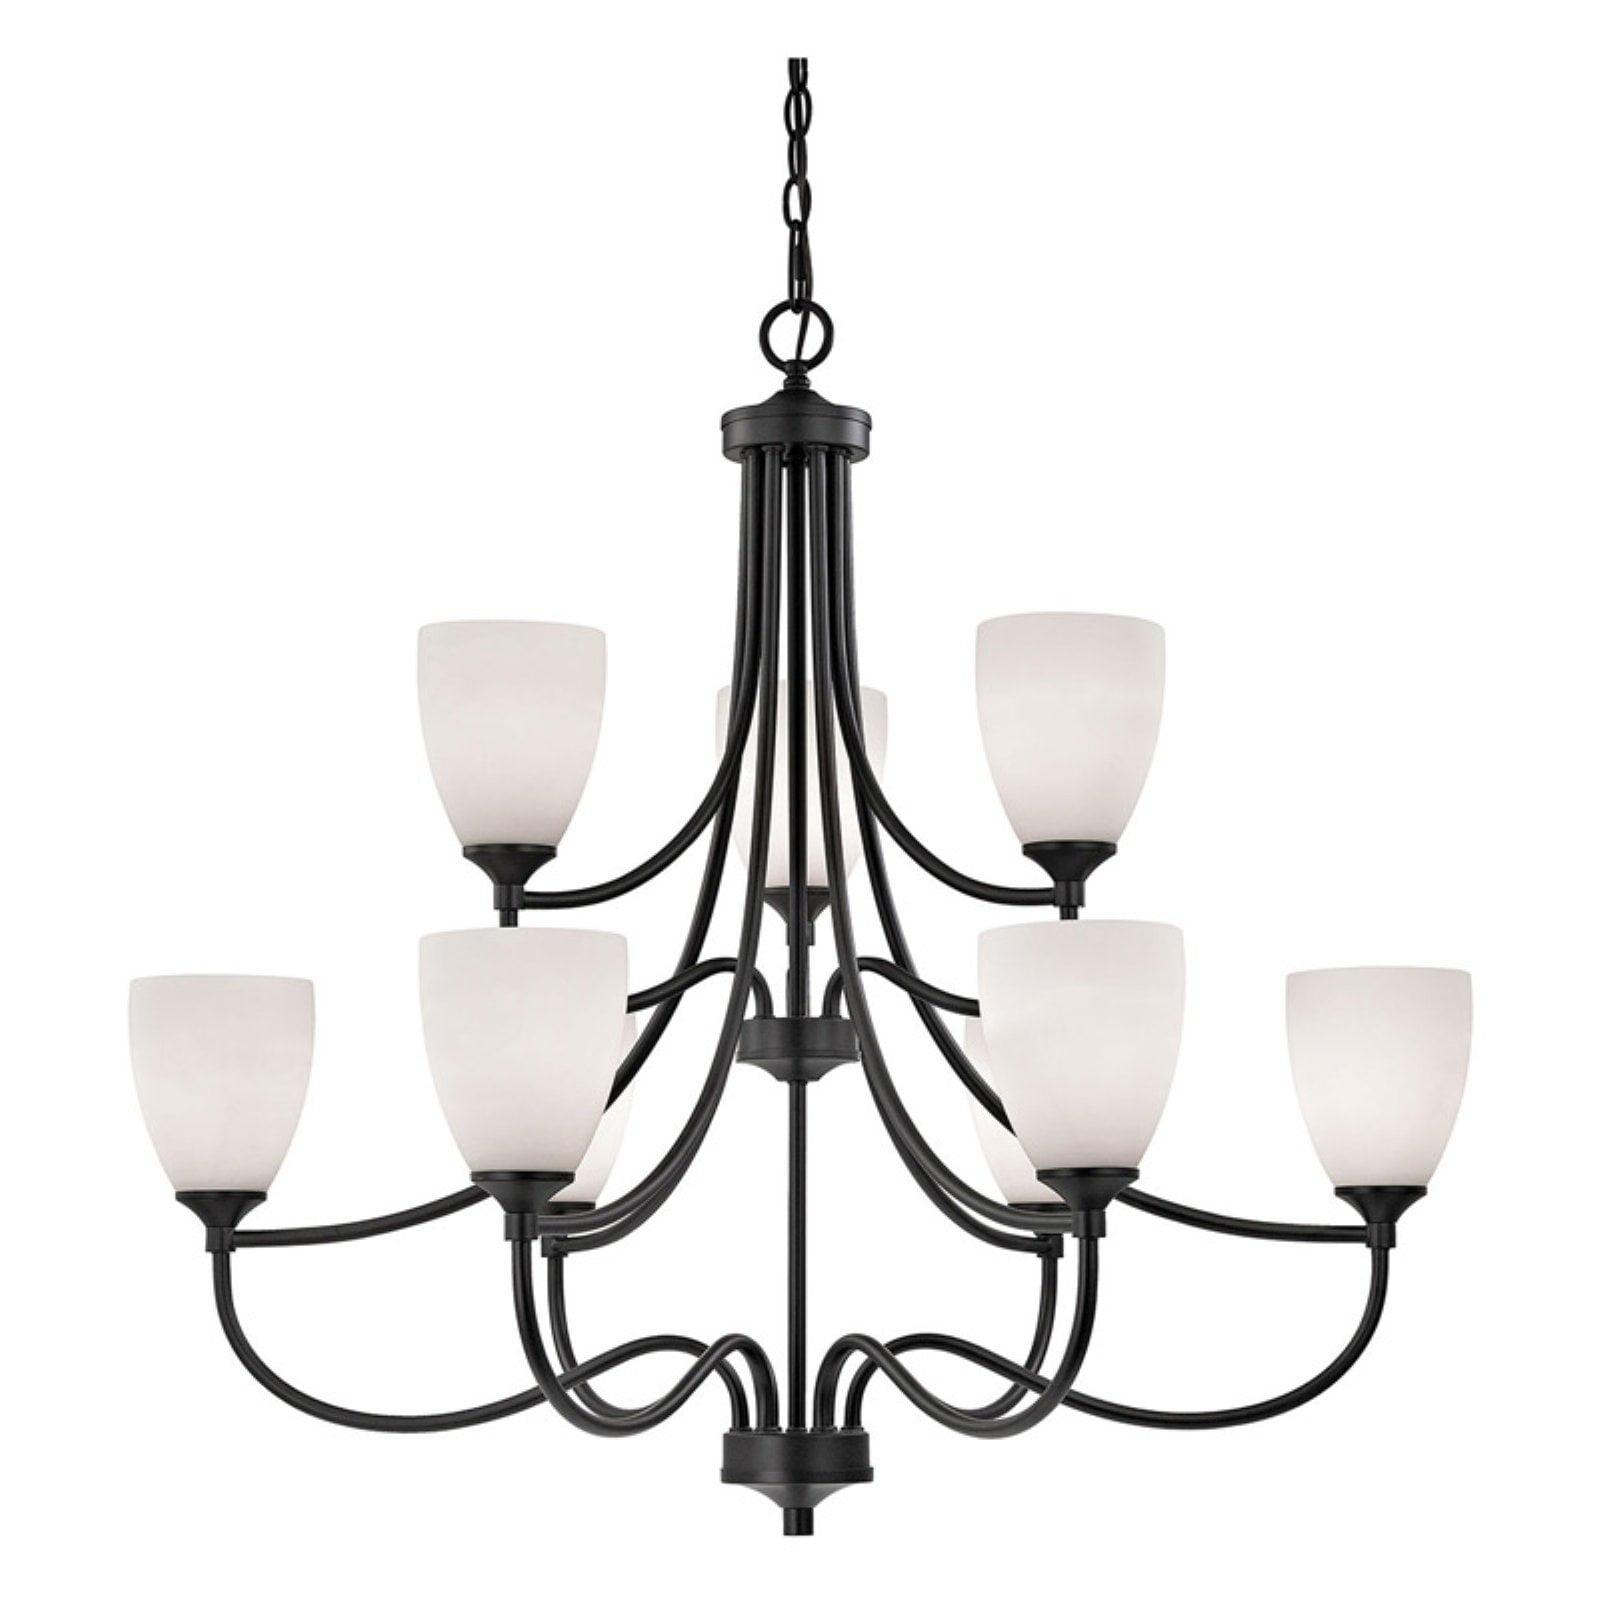 Arlington Traditional 9-Light Oil Rubbed Bronze Chandelier with White Glass